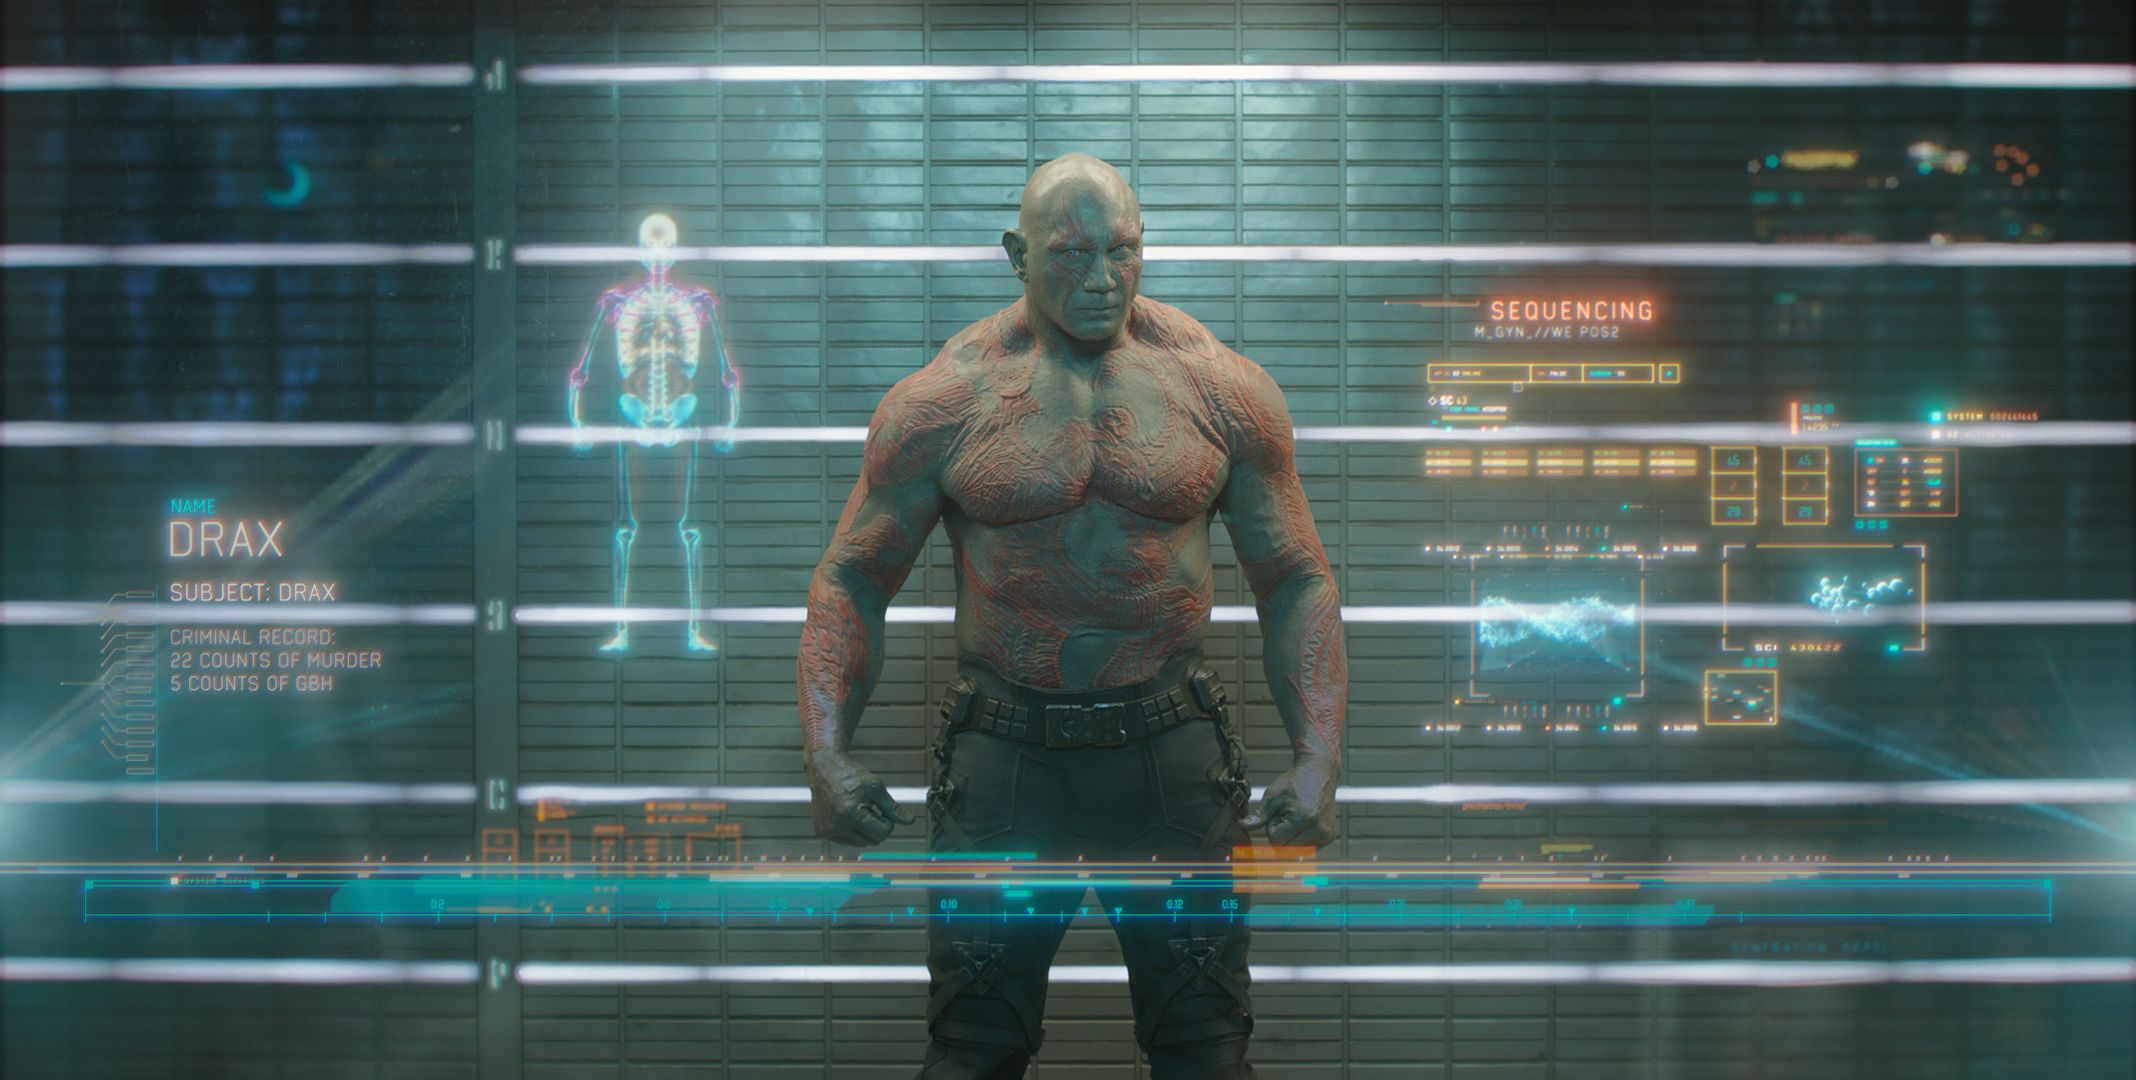 Guardians Of The Galaxy 8 Drax Quotes That Destroy